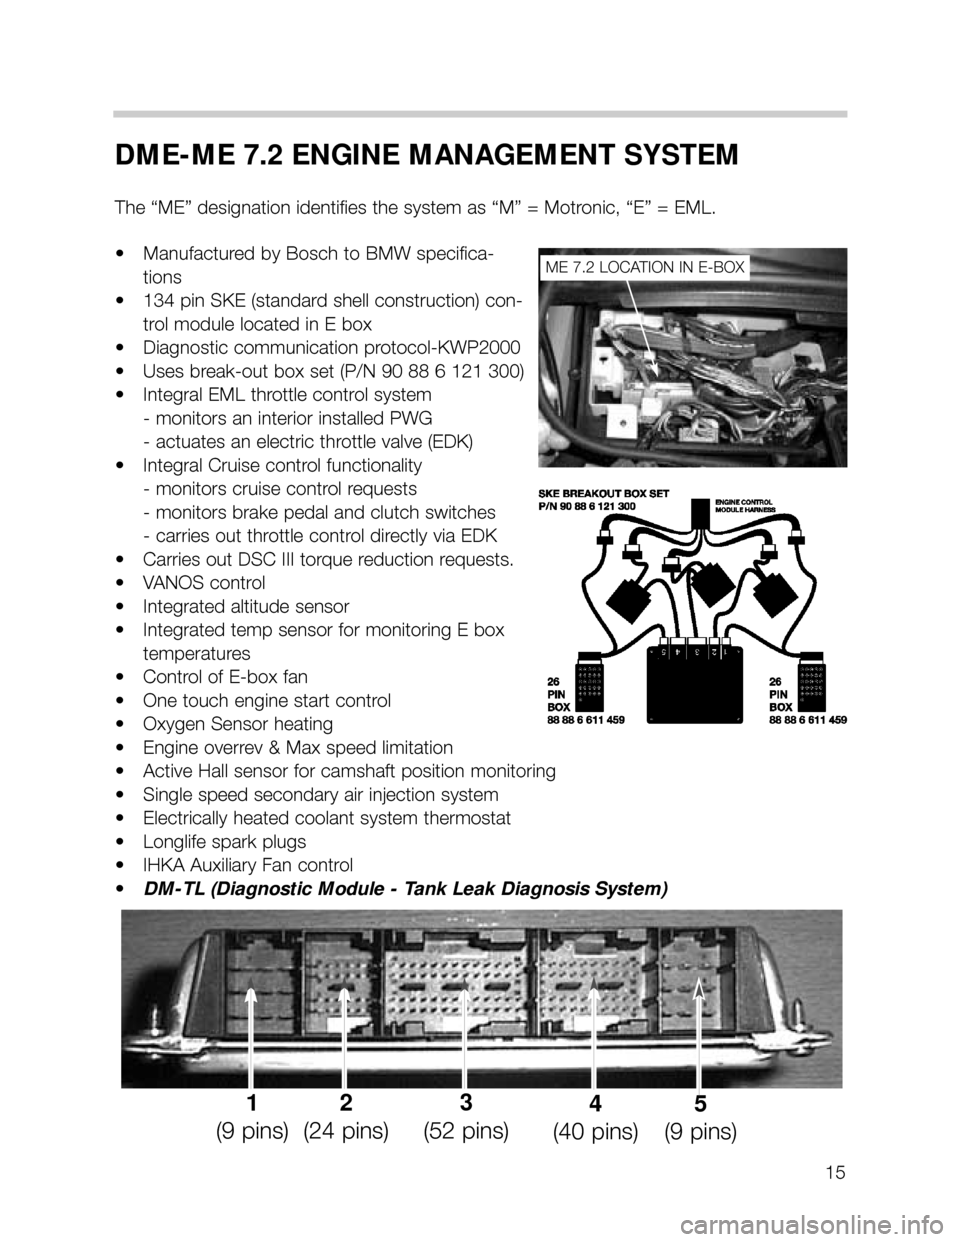 BMW X5 2004 E53 M62TU Engine Workshop Manual 15
DME-ME 7.2 ENGINE MANAGEMENT SYSTEM
The “ME” designation identifies the system as “M” = Motronic, “E” = EML.
• Manufactured by Bosch to BMW specifica-
tions
• 134 pin SKE (standard 